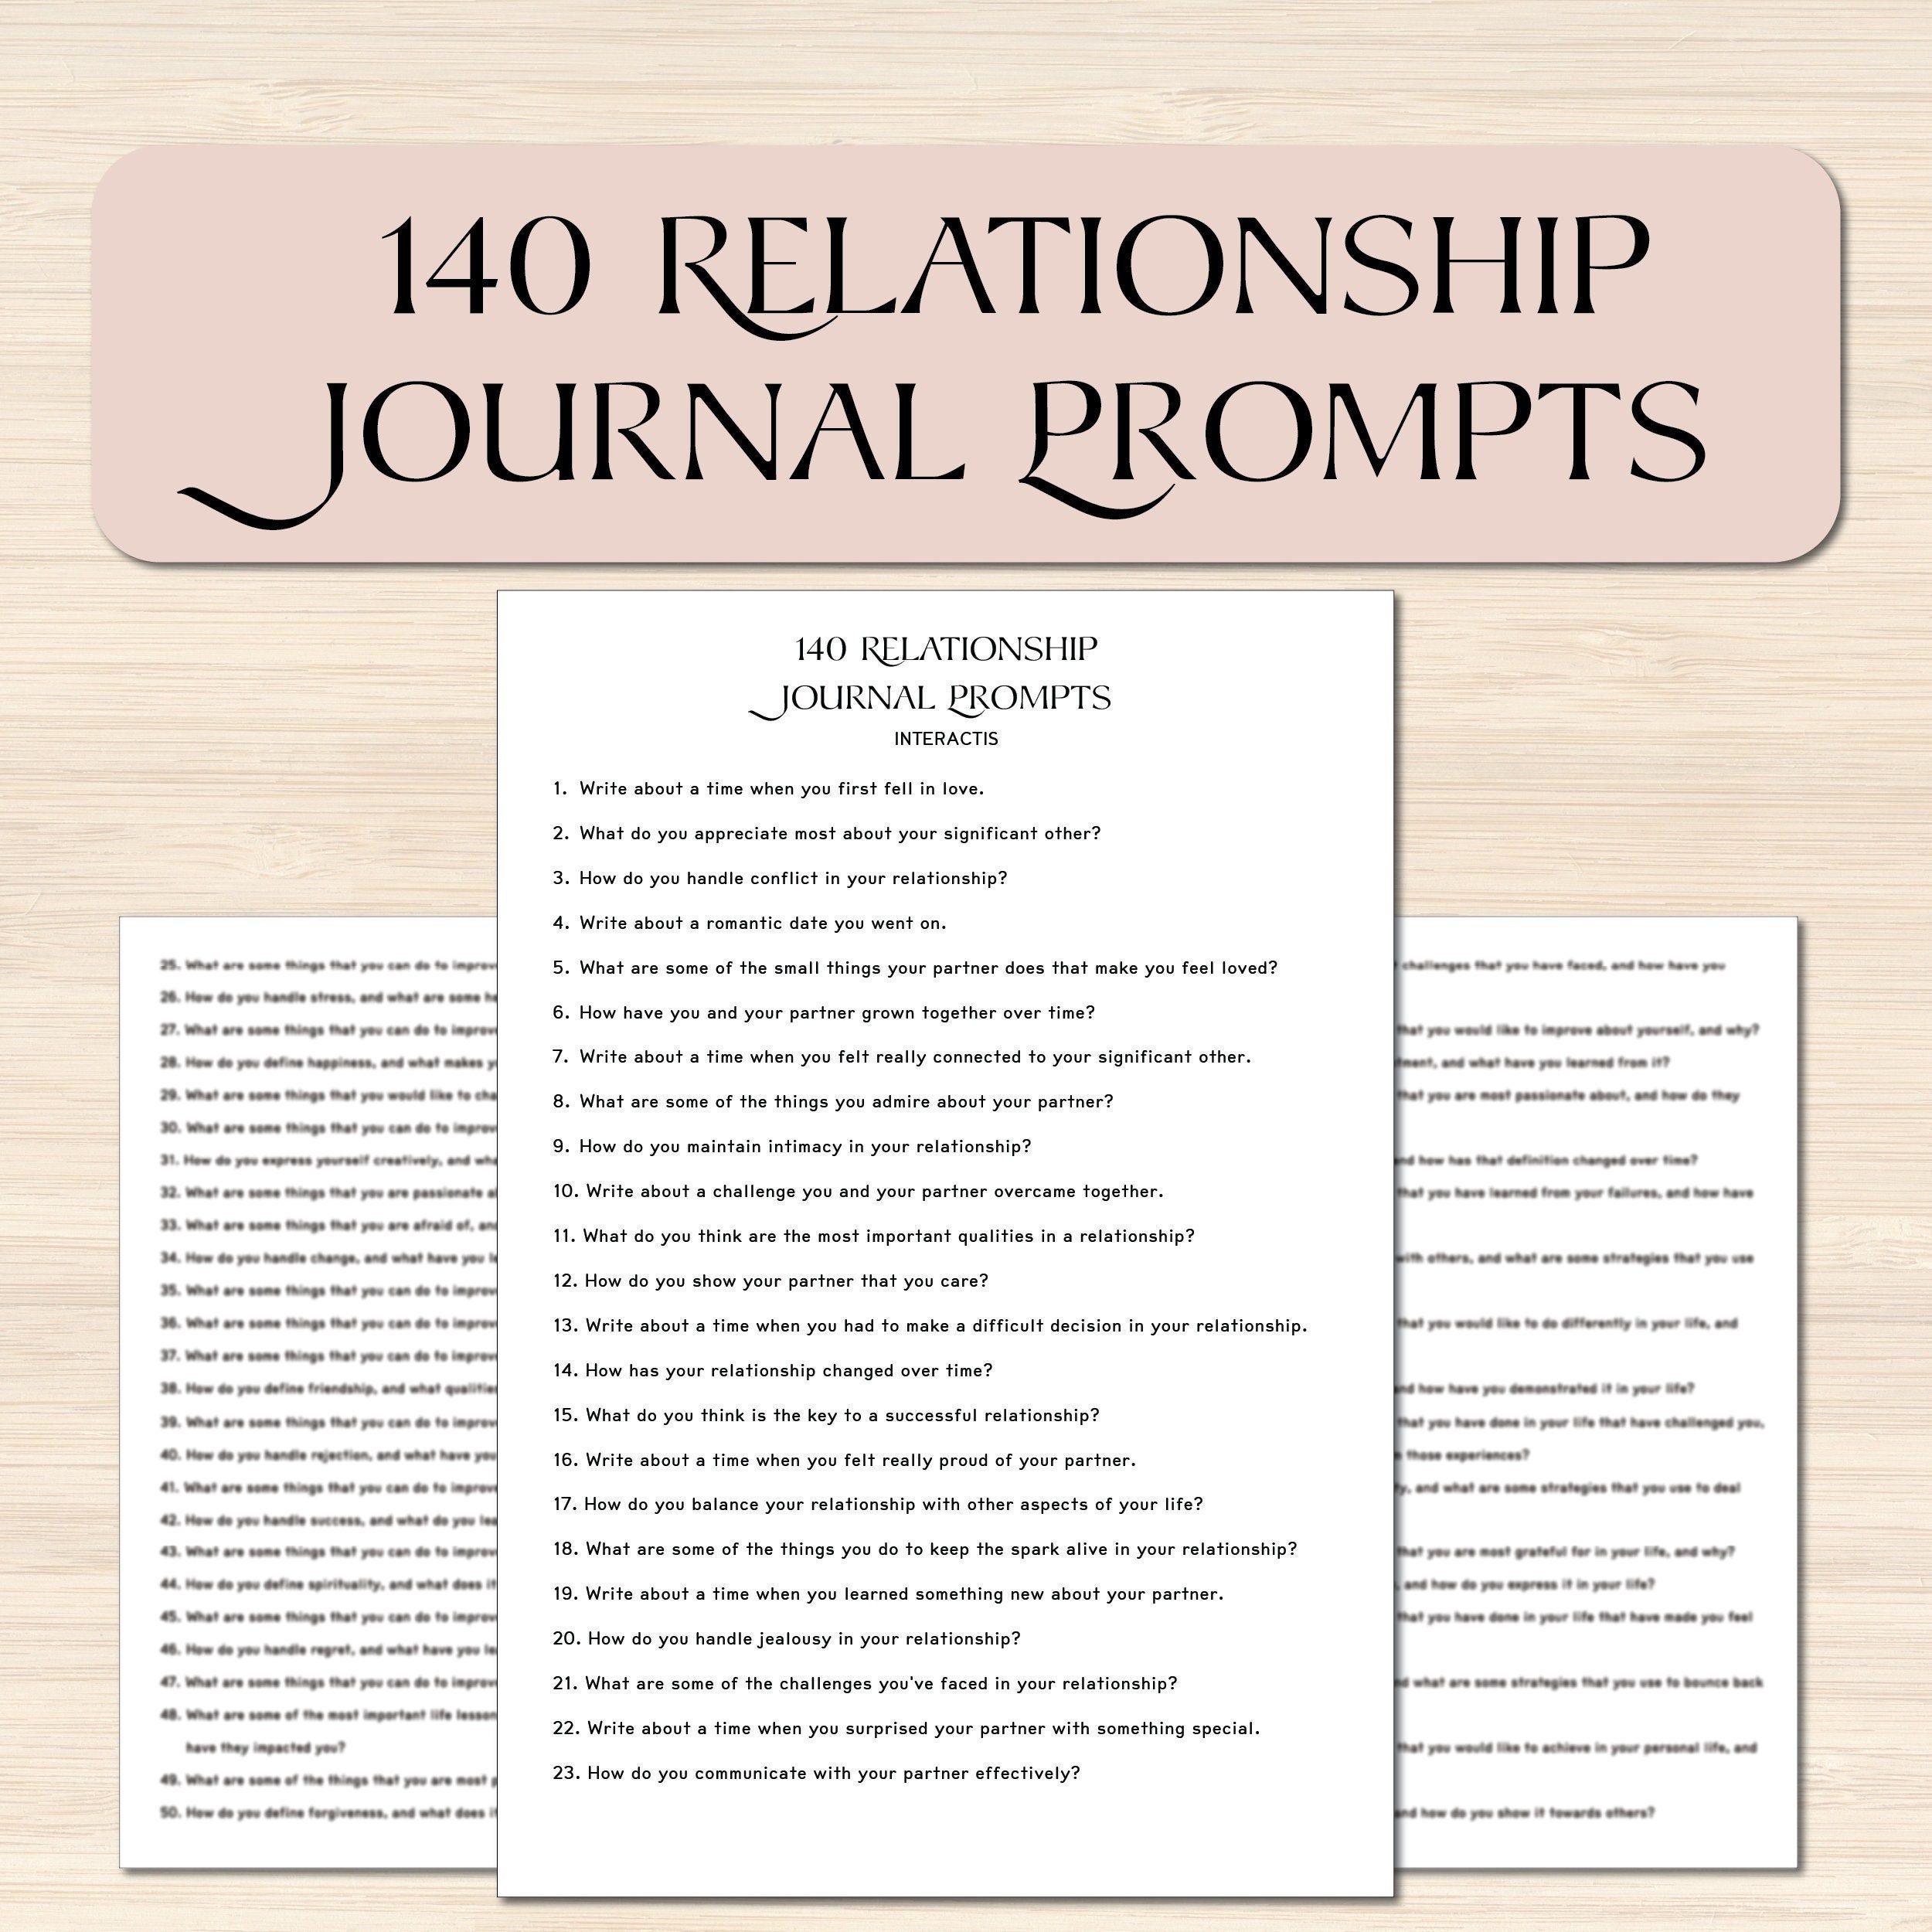 Relationship Journal Prompts